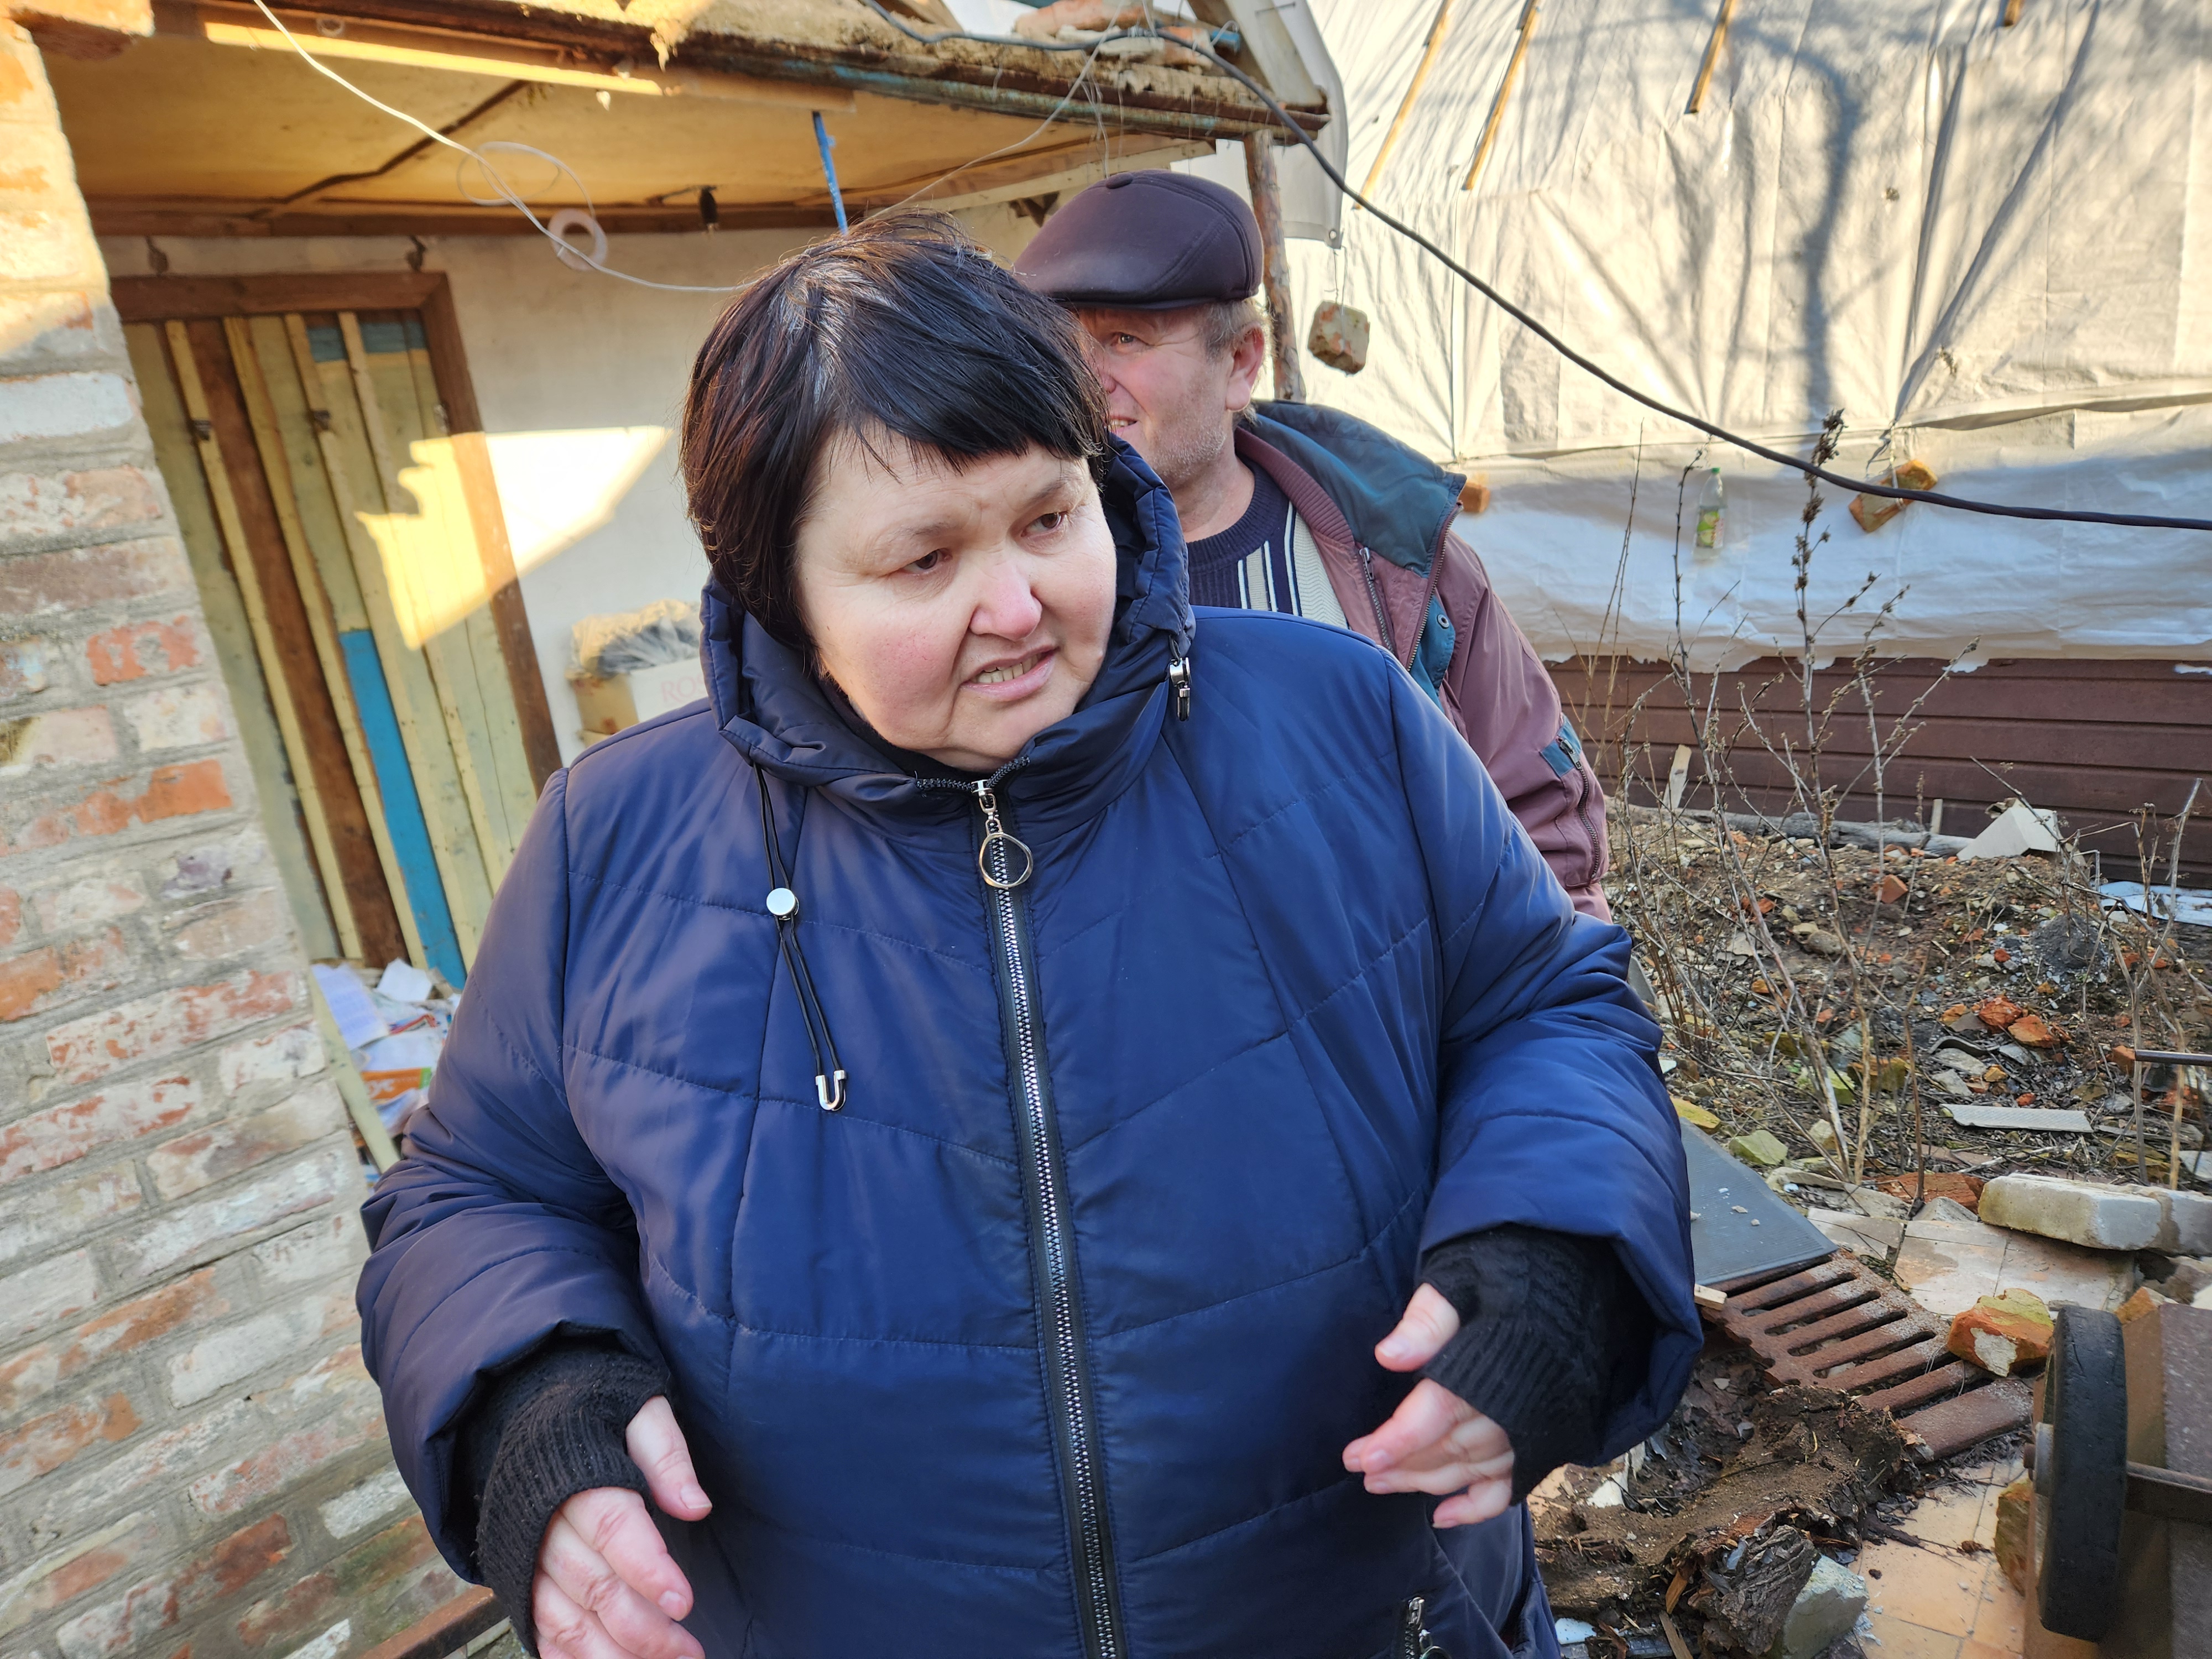 Inna Sirinok, and her husband, Yurii, survey their destroyed home in the eastern Ukrainian village of Preobrazhenka "We honestly don't have the strength to recover," Sirinok said, so considerable is the amount of damage to the house. "We have to start over," added Yurii, 55. "We don't have the strength. We're elderly." (GSR photo/Chris Herlinger)